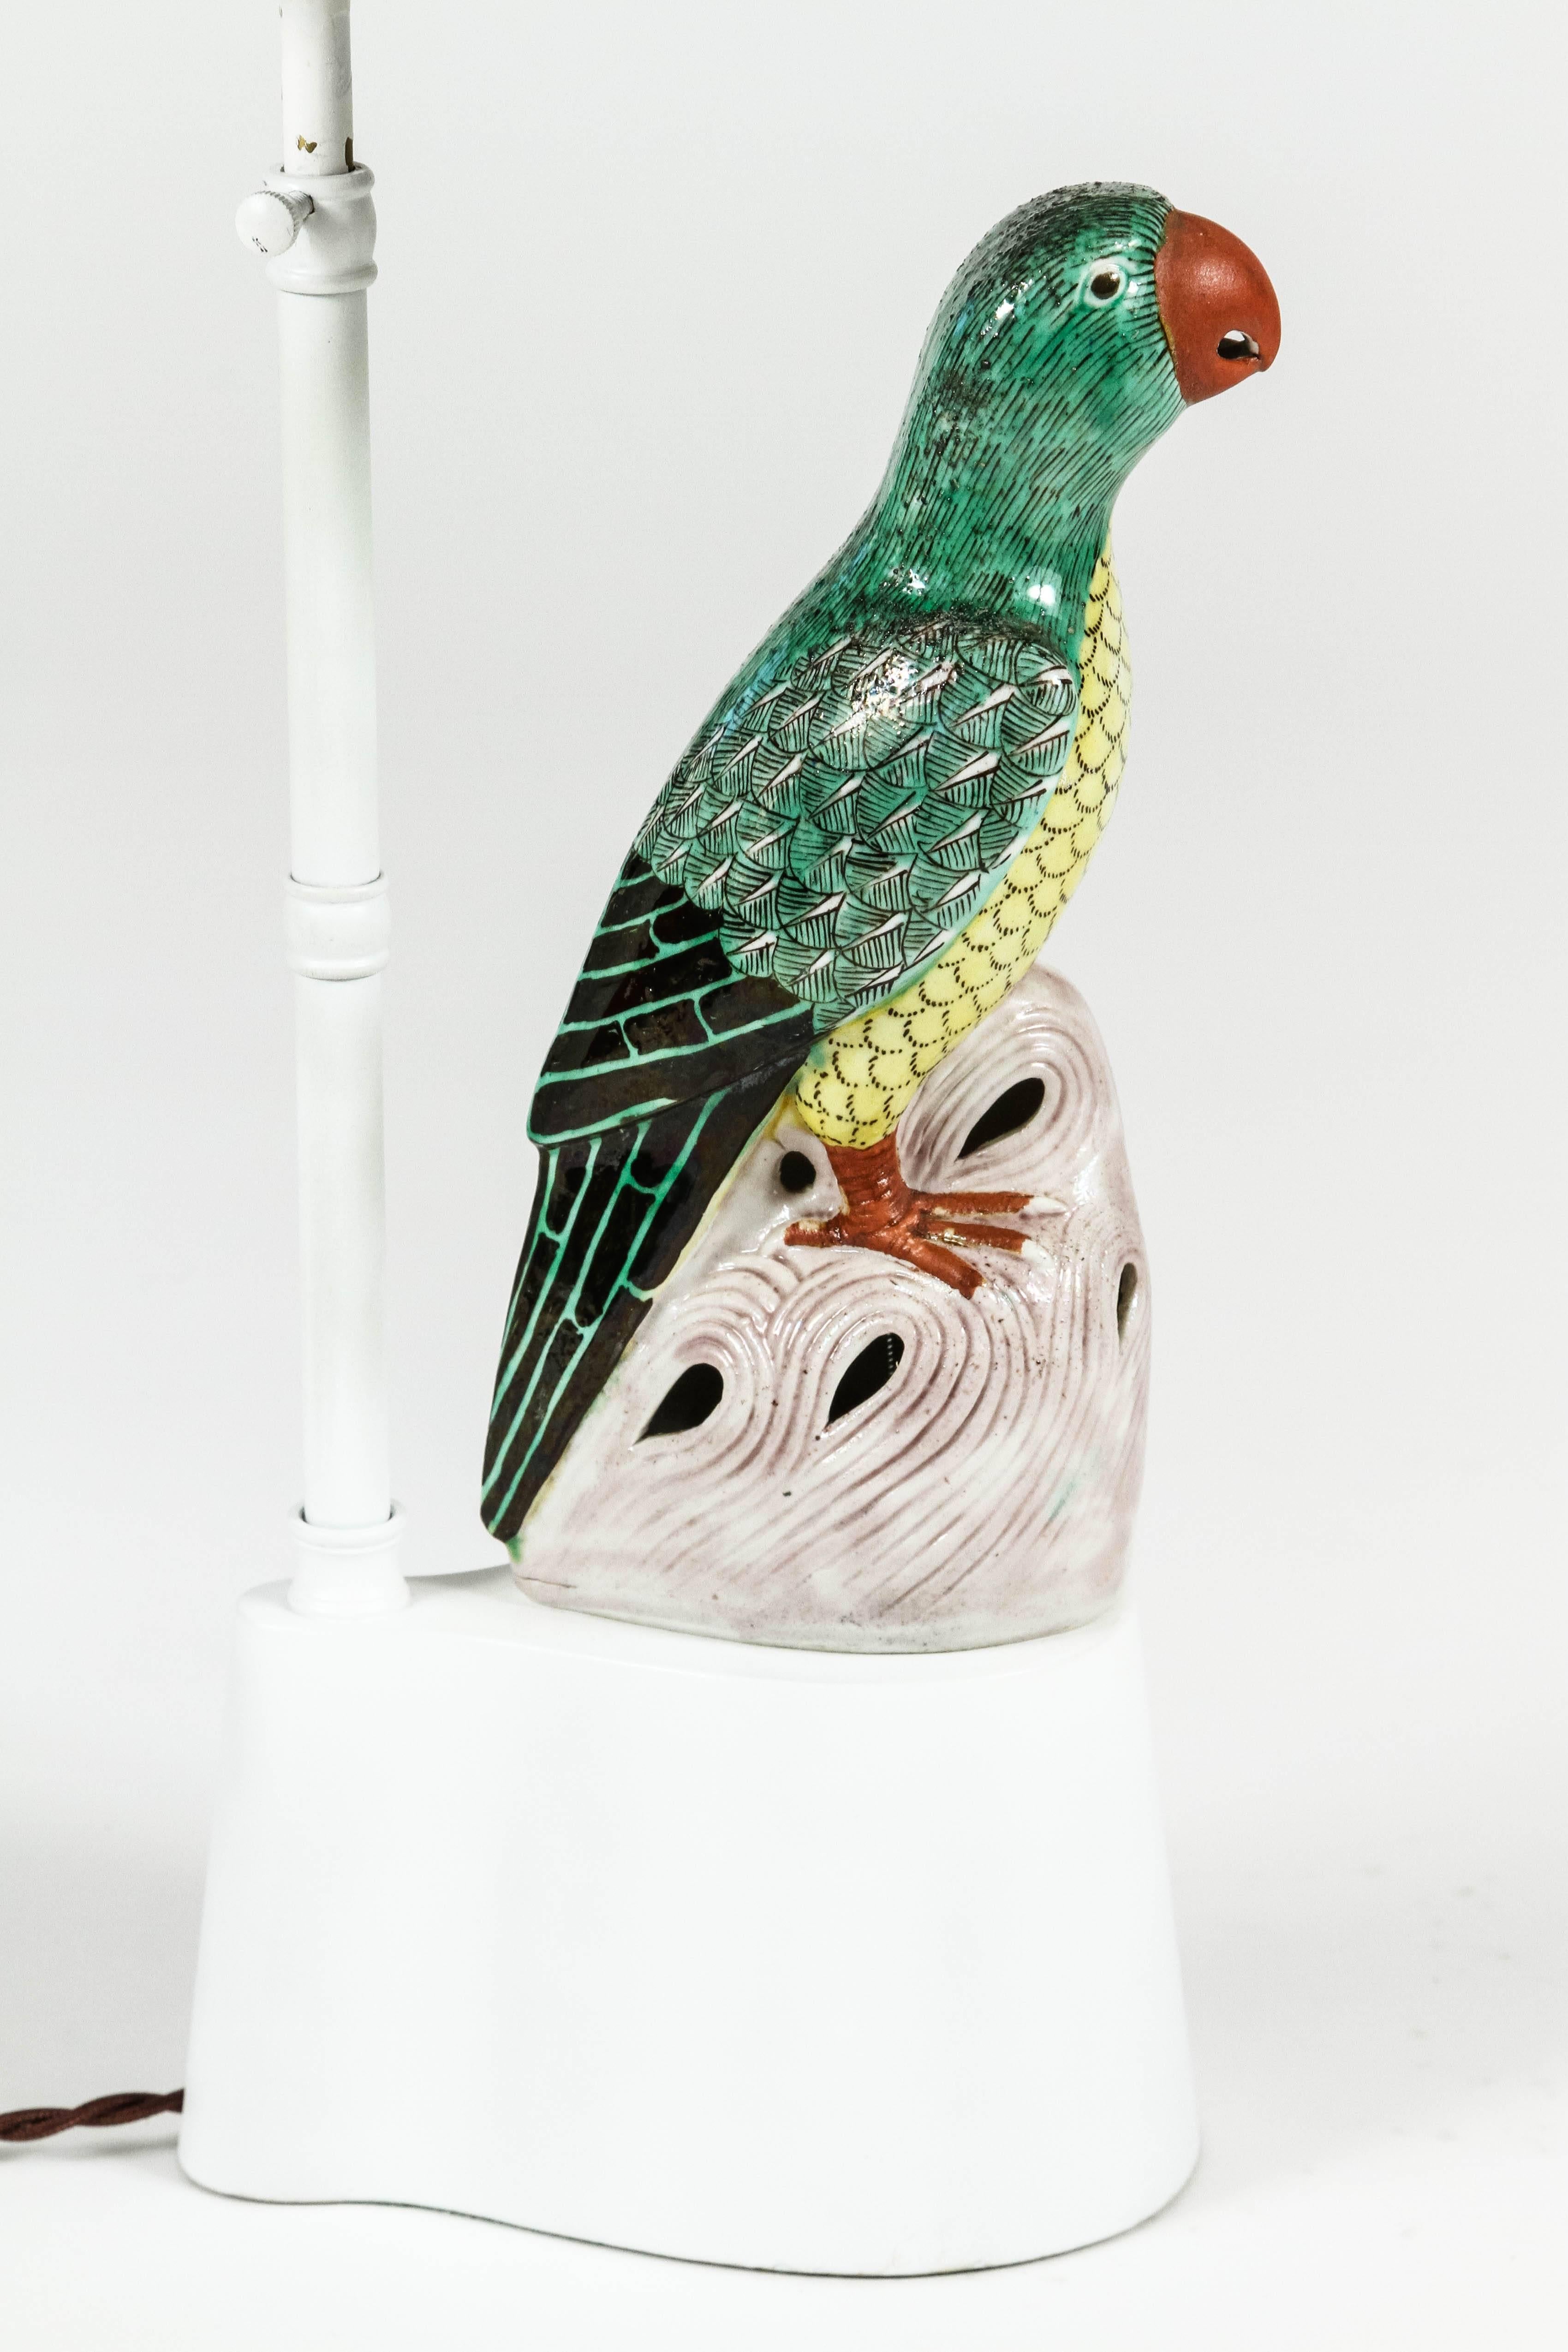 Charming armature lamp by William Haines featuring a ceramic parrot and custom Maria Kipp shade. Lamp has been rewired with cloth twist cord. This lamp was acquired from the estate of renowned LA florist David Jones.

Dimensions in listing are